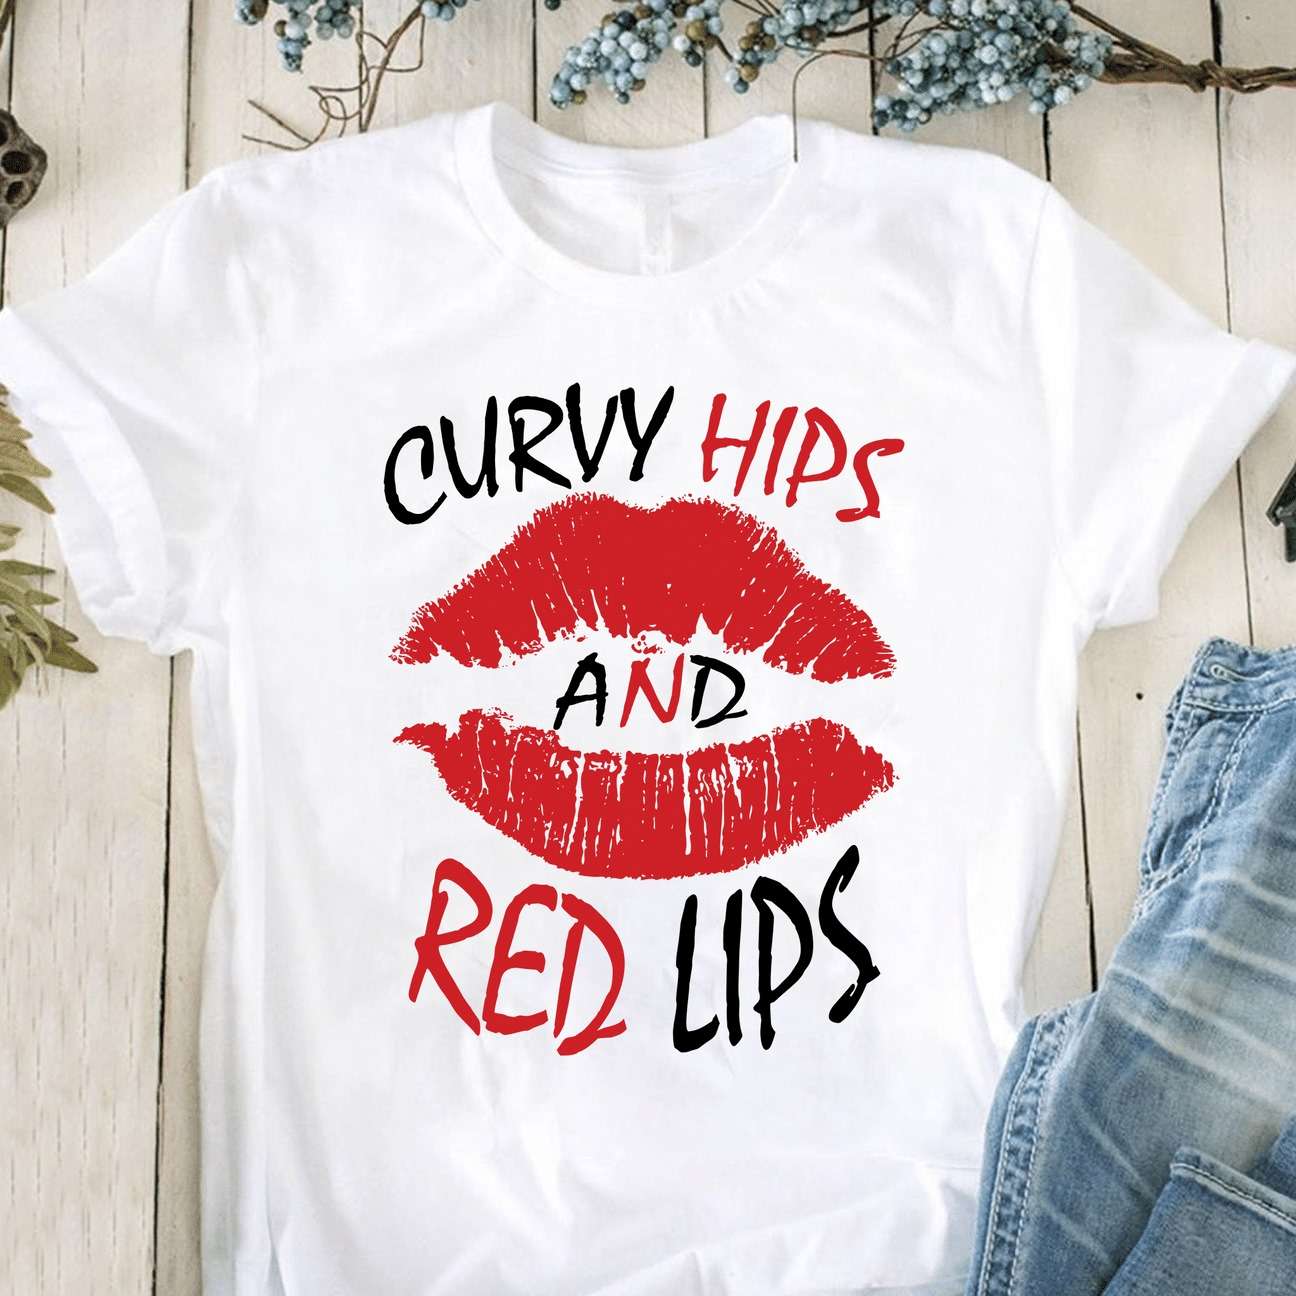 Curvy hips and red lips - Woman red lips